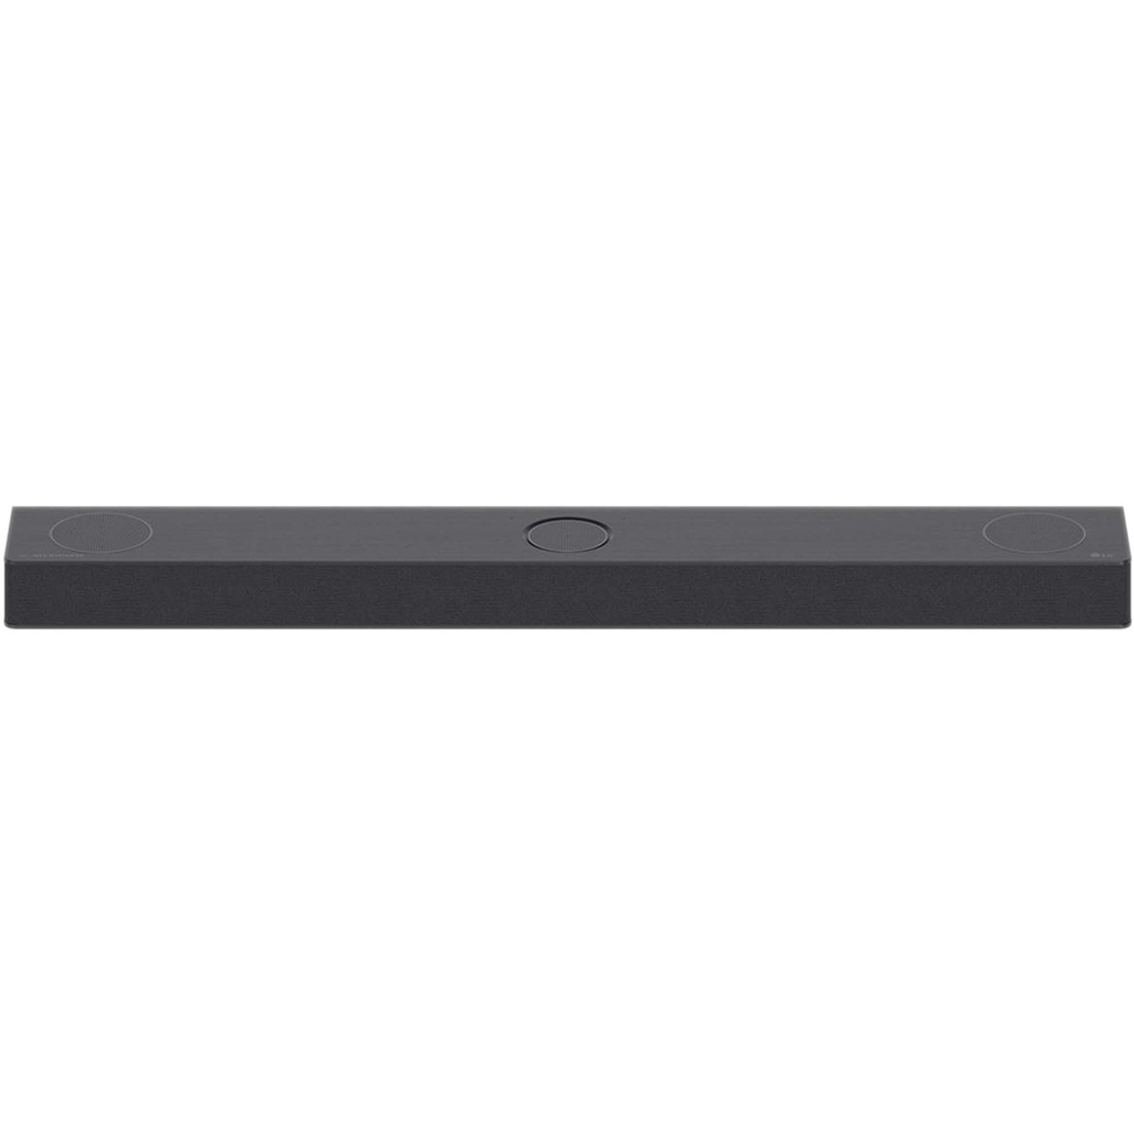 LG S80QY 3.1.2 Channel 480W High Res Sound Bar with Dolby Atmos and Apple Airplay 2 - Image 4 of 8